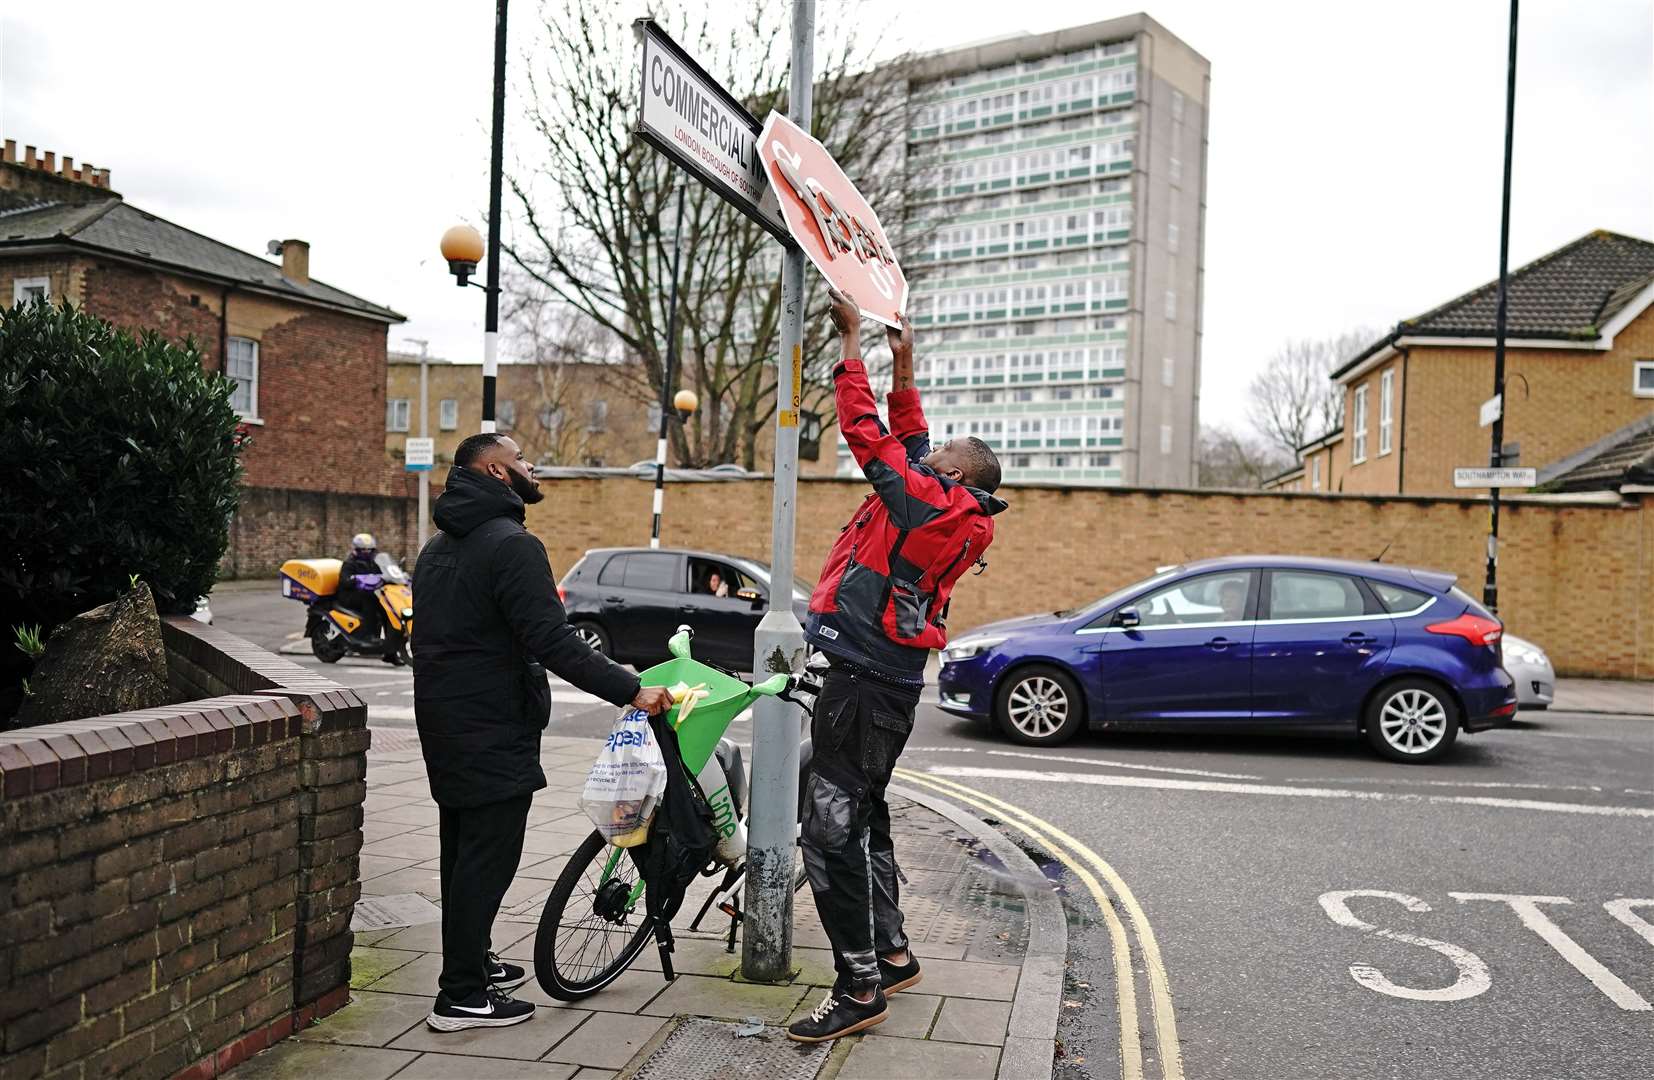 The stop sign was located at the intersection of Southampton Way and Commercial Way in Peckham (Aaron Chown/PA)